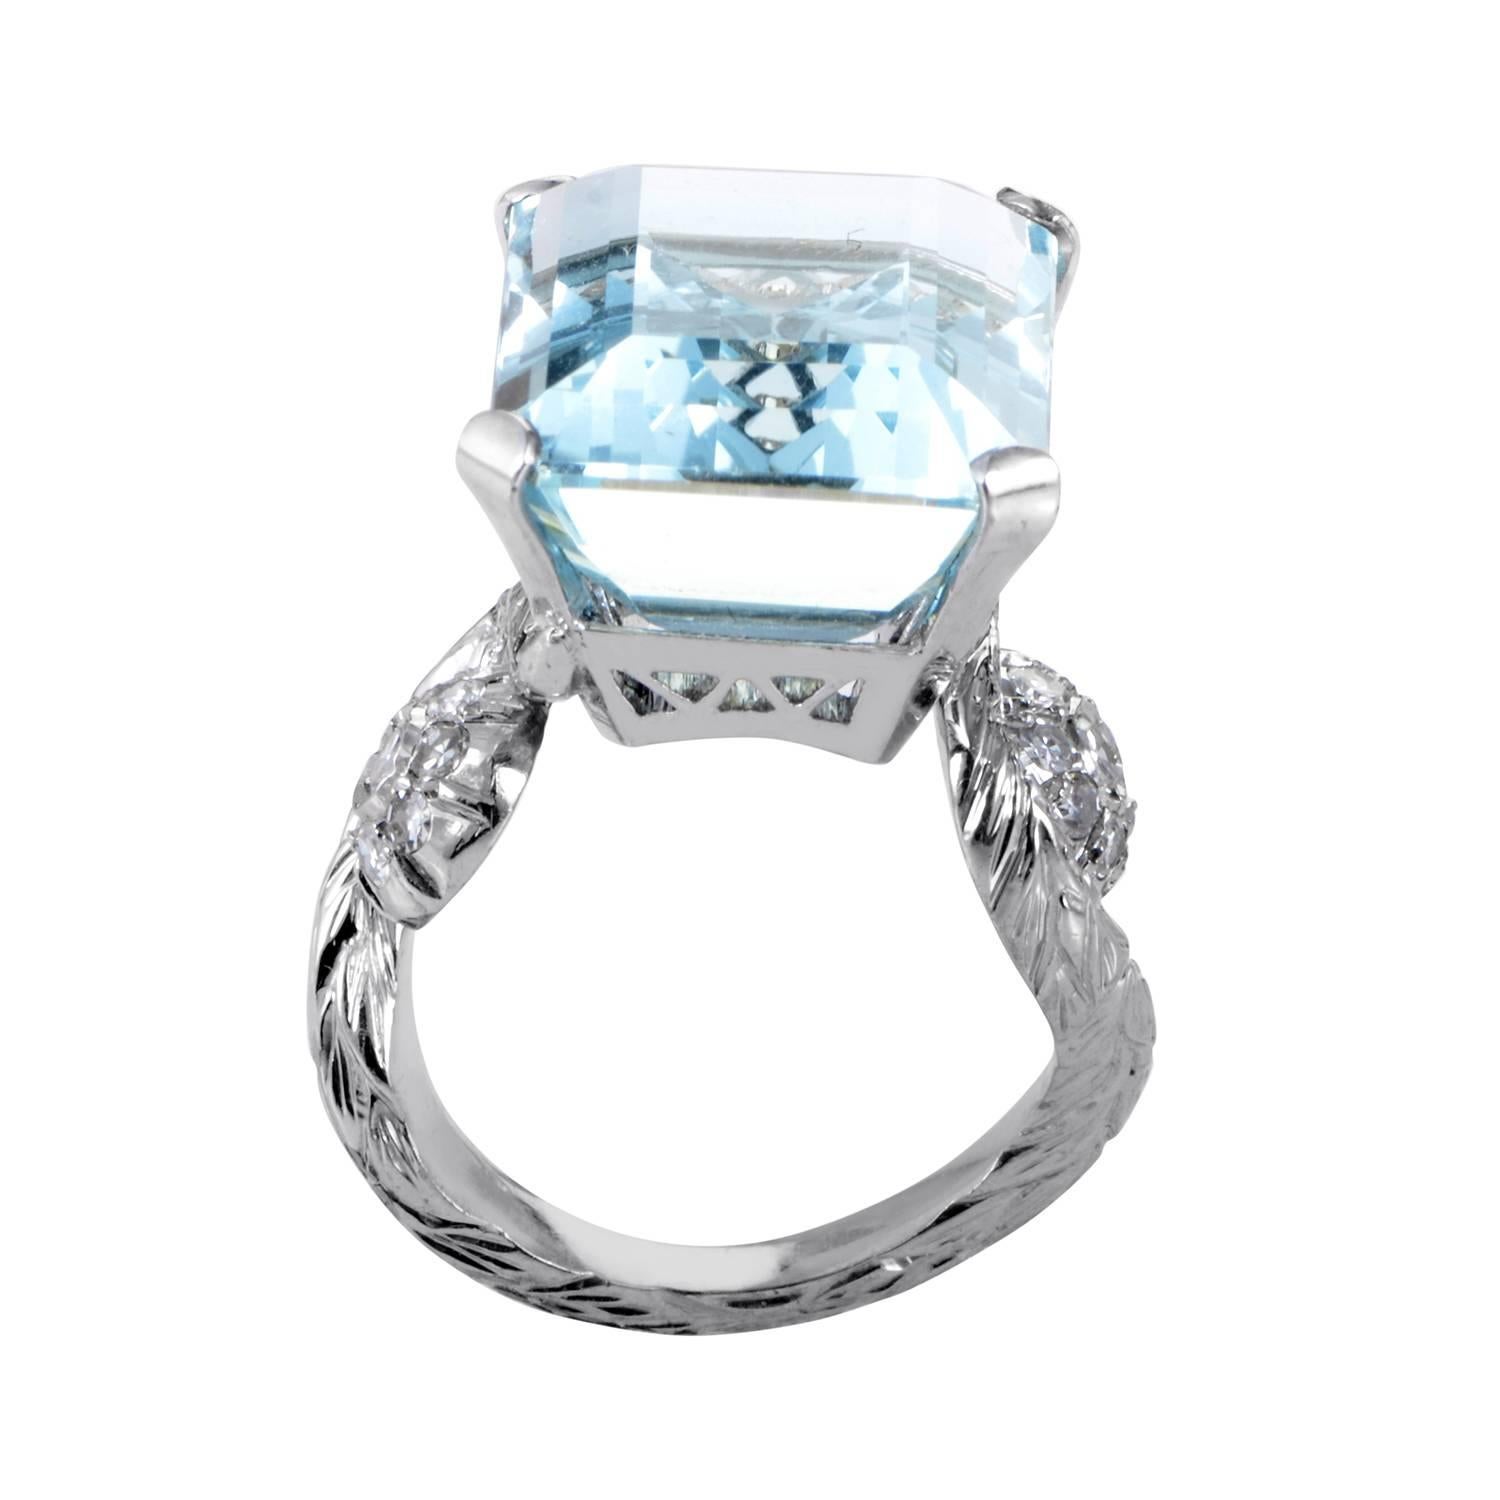 The watery glisten, captivating depth and wonderfully bright nuance of the splendid aquamarine stone weighing 18.45 carats are harmoniously complemented by the unblemished shimmer of 18K white gold and lustrous allure of diamonds totaling 0.52ct in